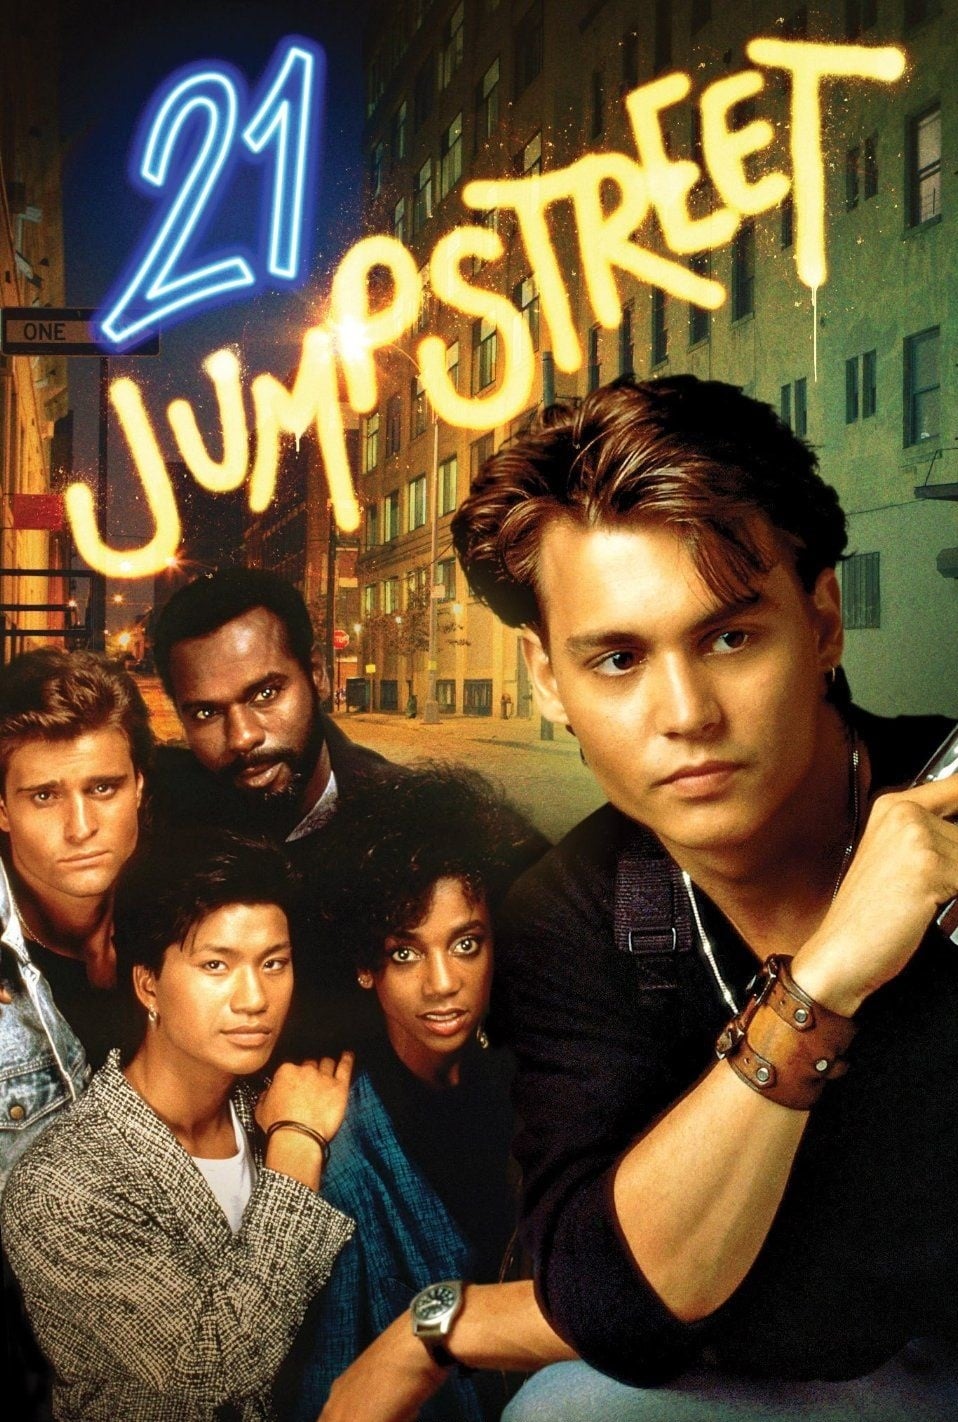 21 Jump Street TV Shows About Cult Tv